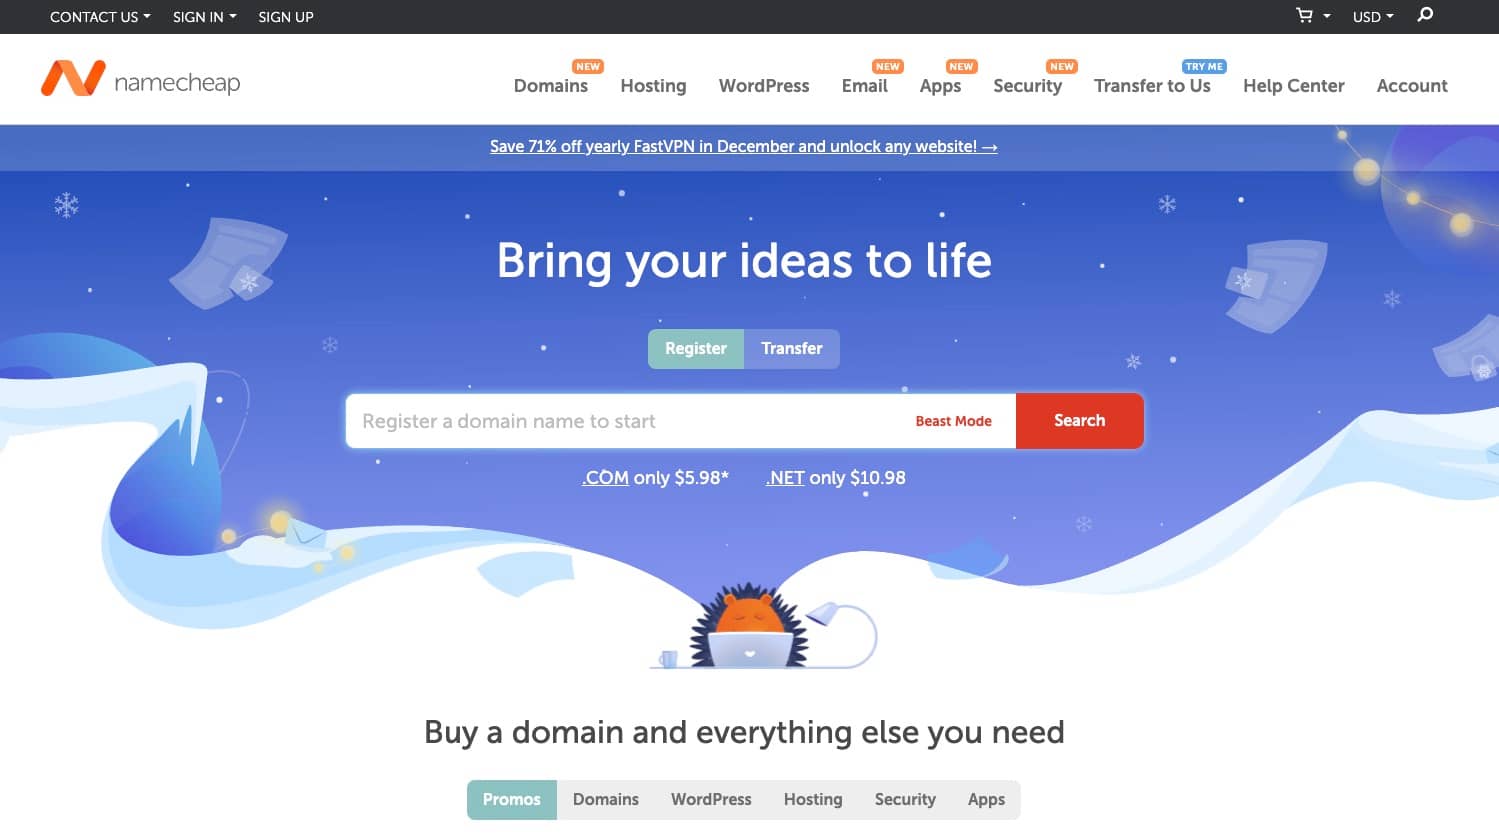 One of the best cheap WordPress hosting service is Namecheap.